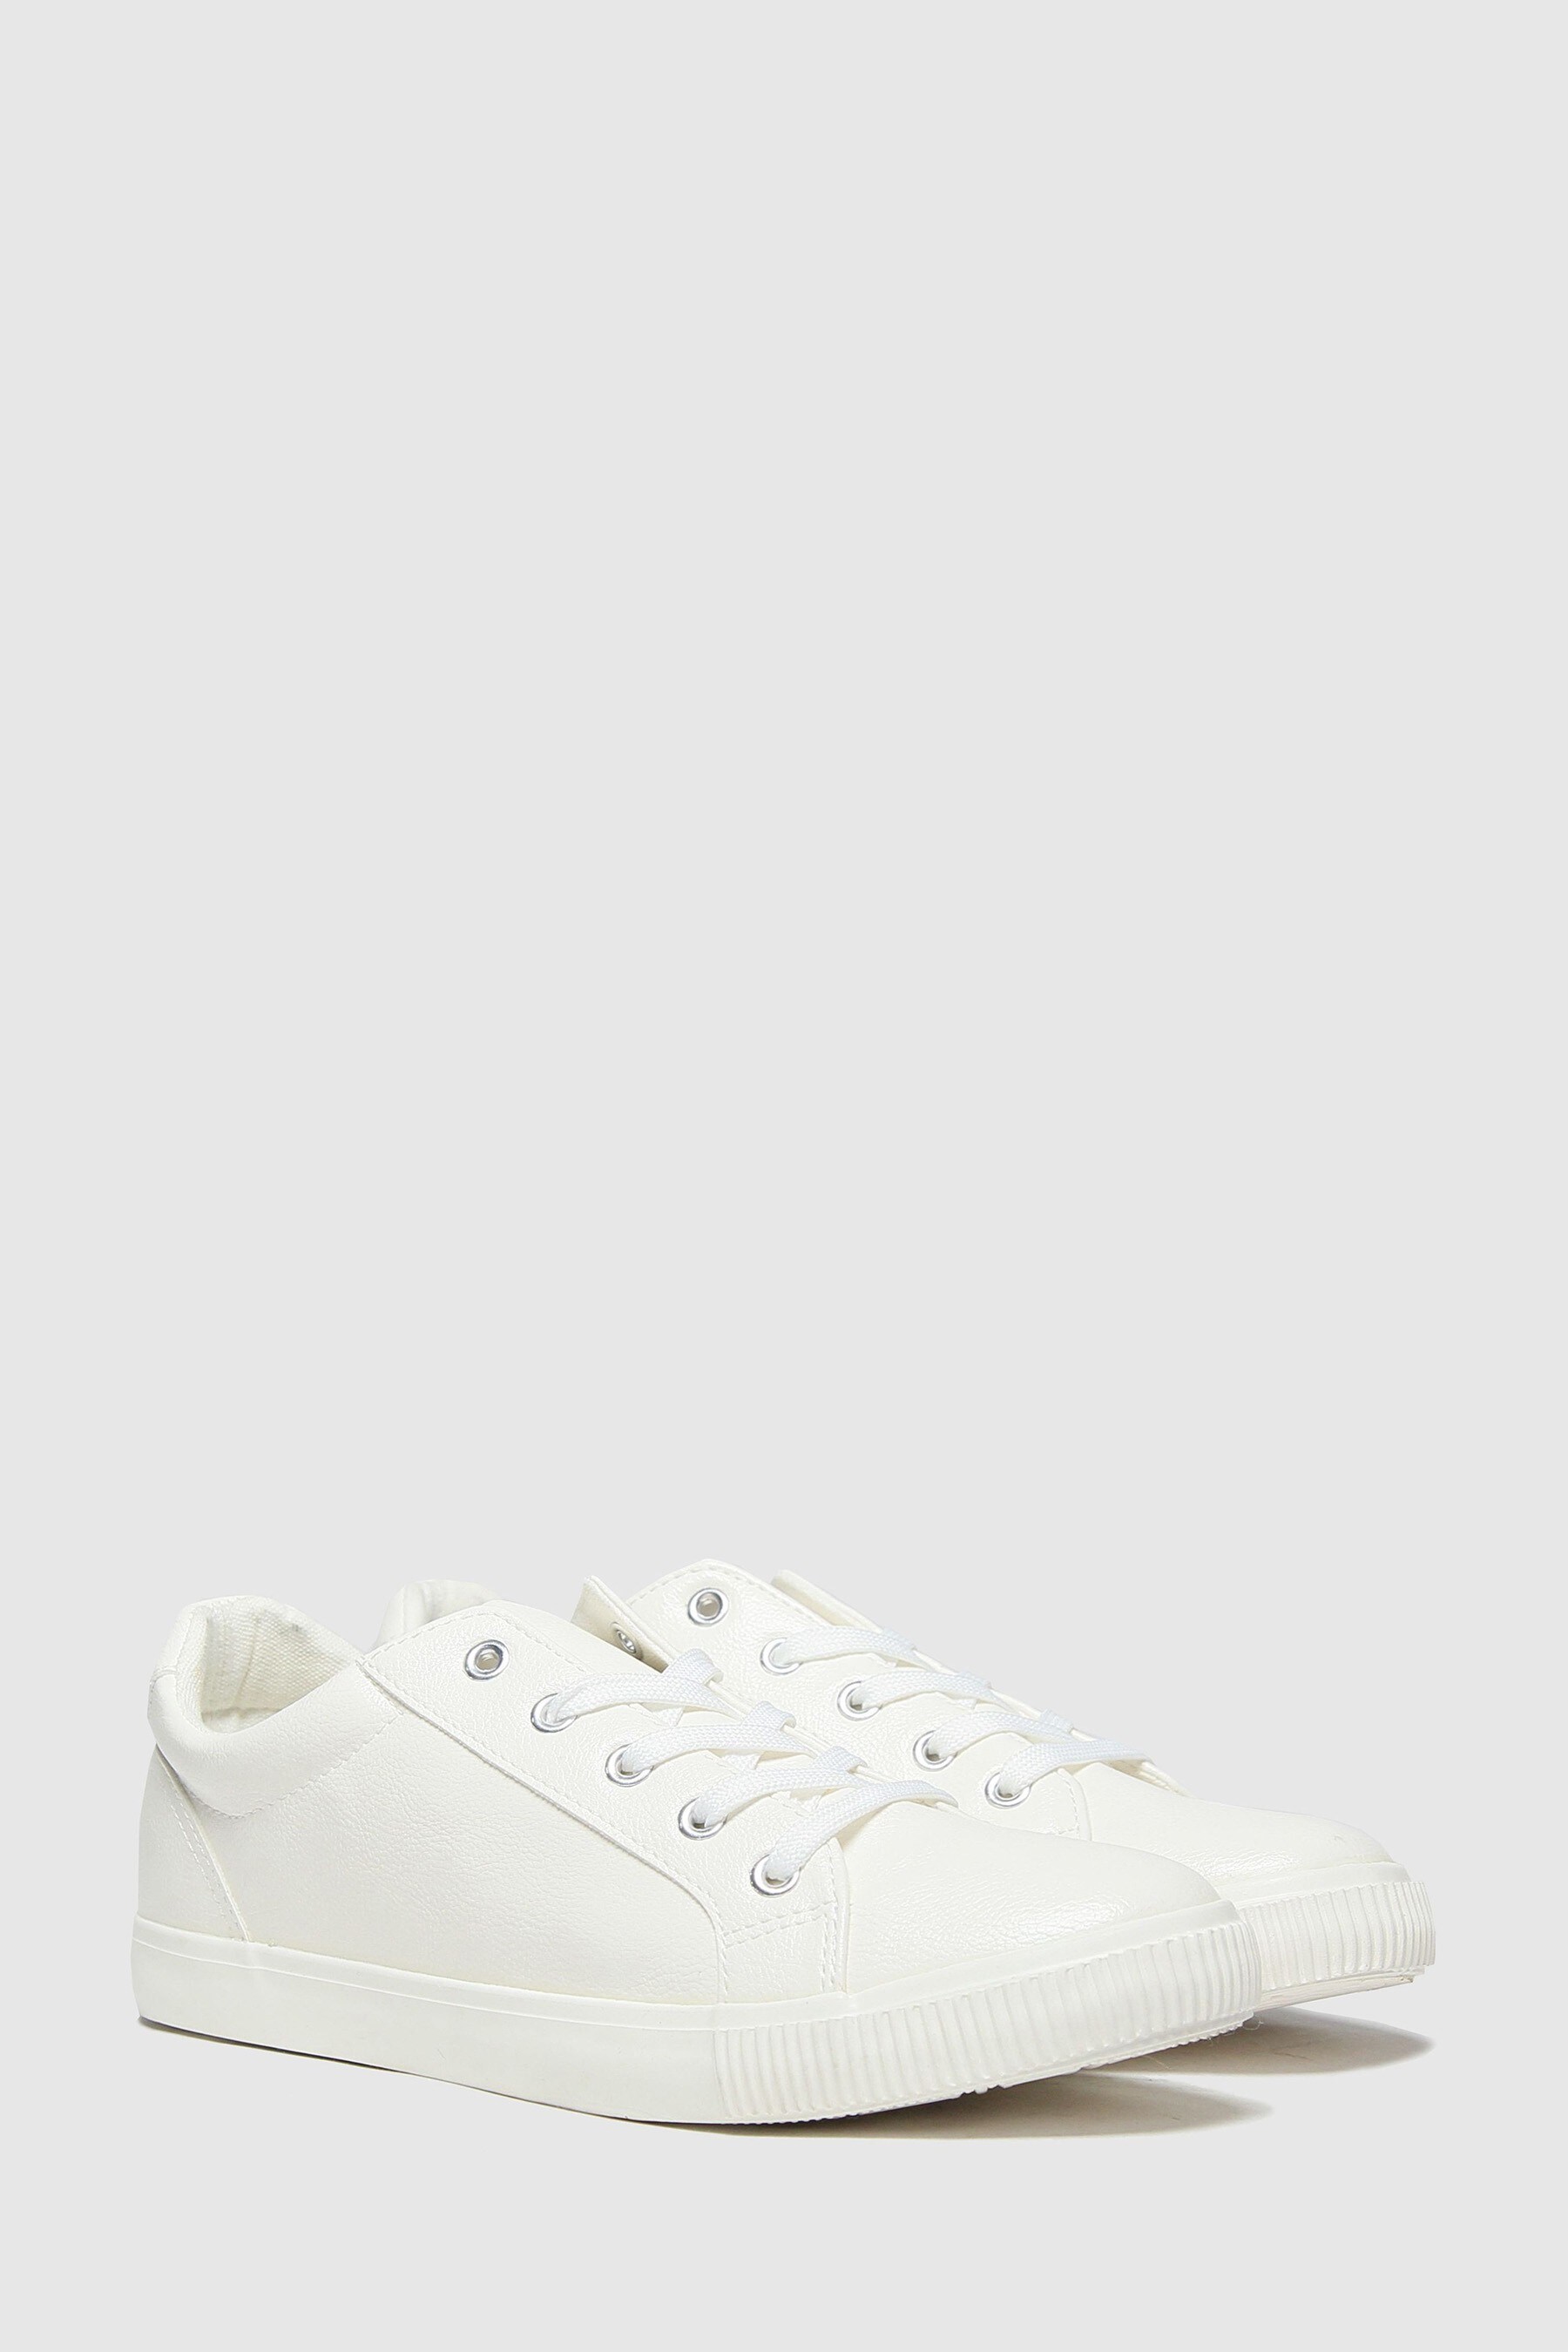 Buy Schuh White Molly Lace Up Trainers from the Next UK online shop